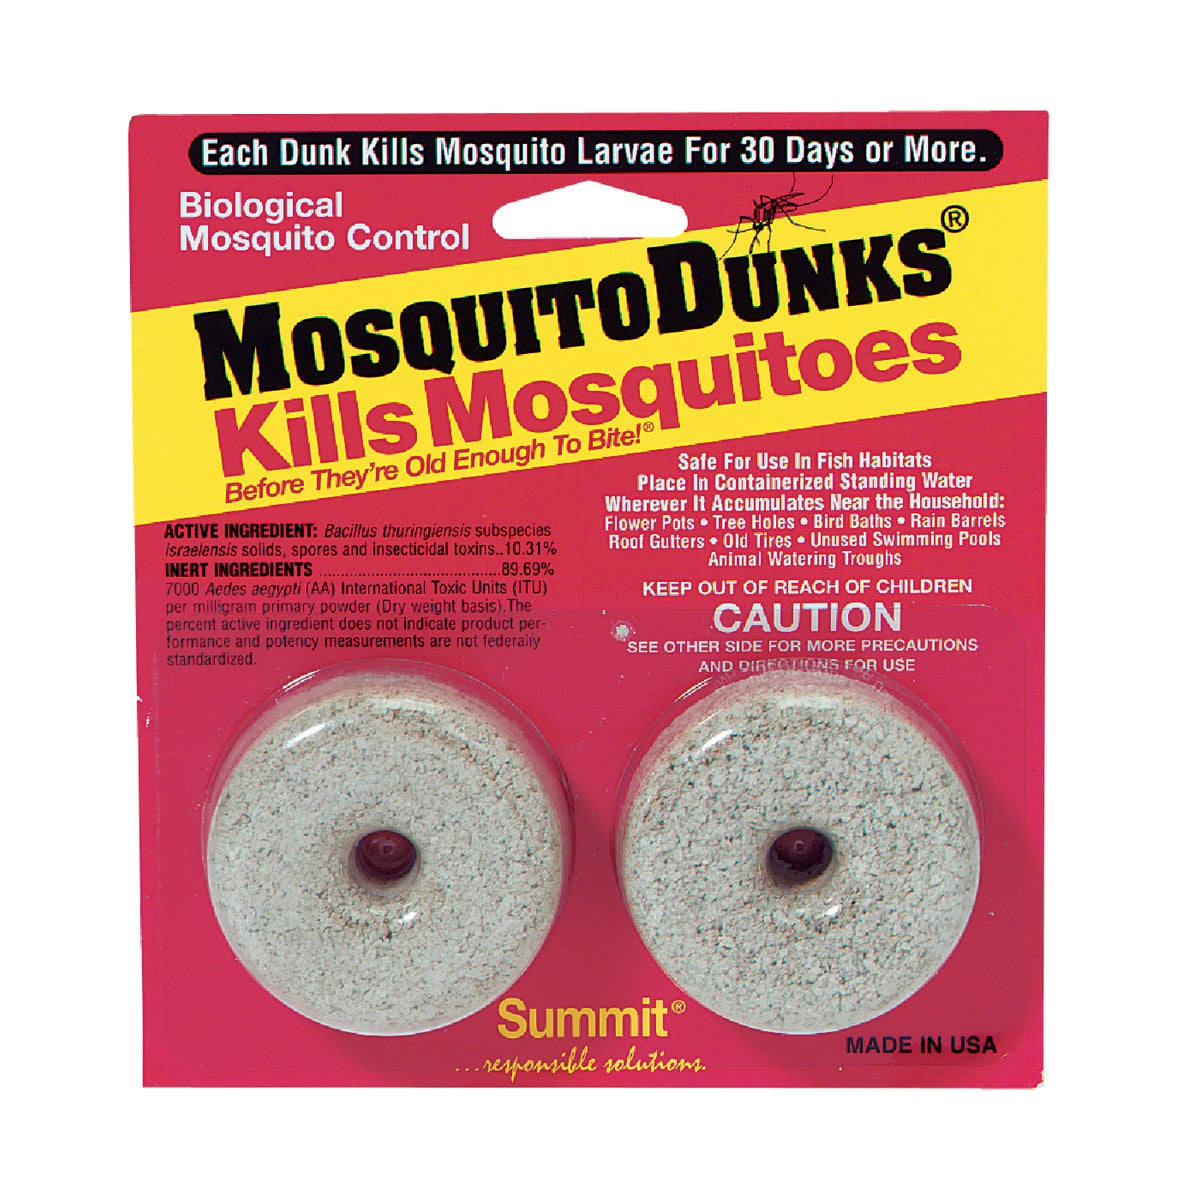 Item 739626, All natural mosquito control.